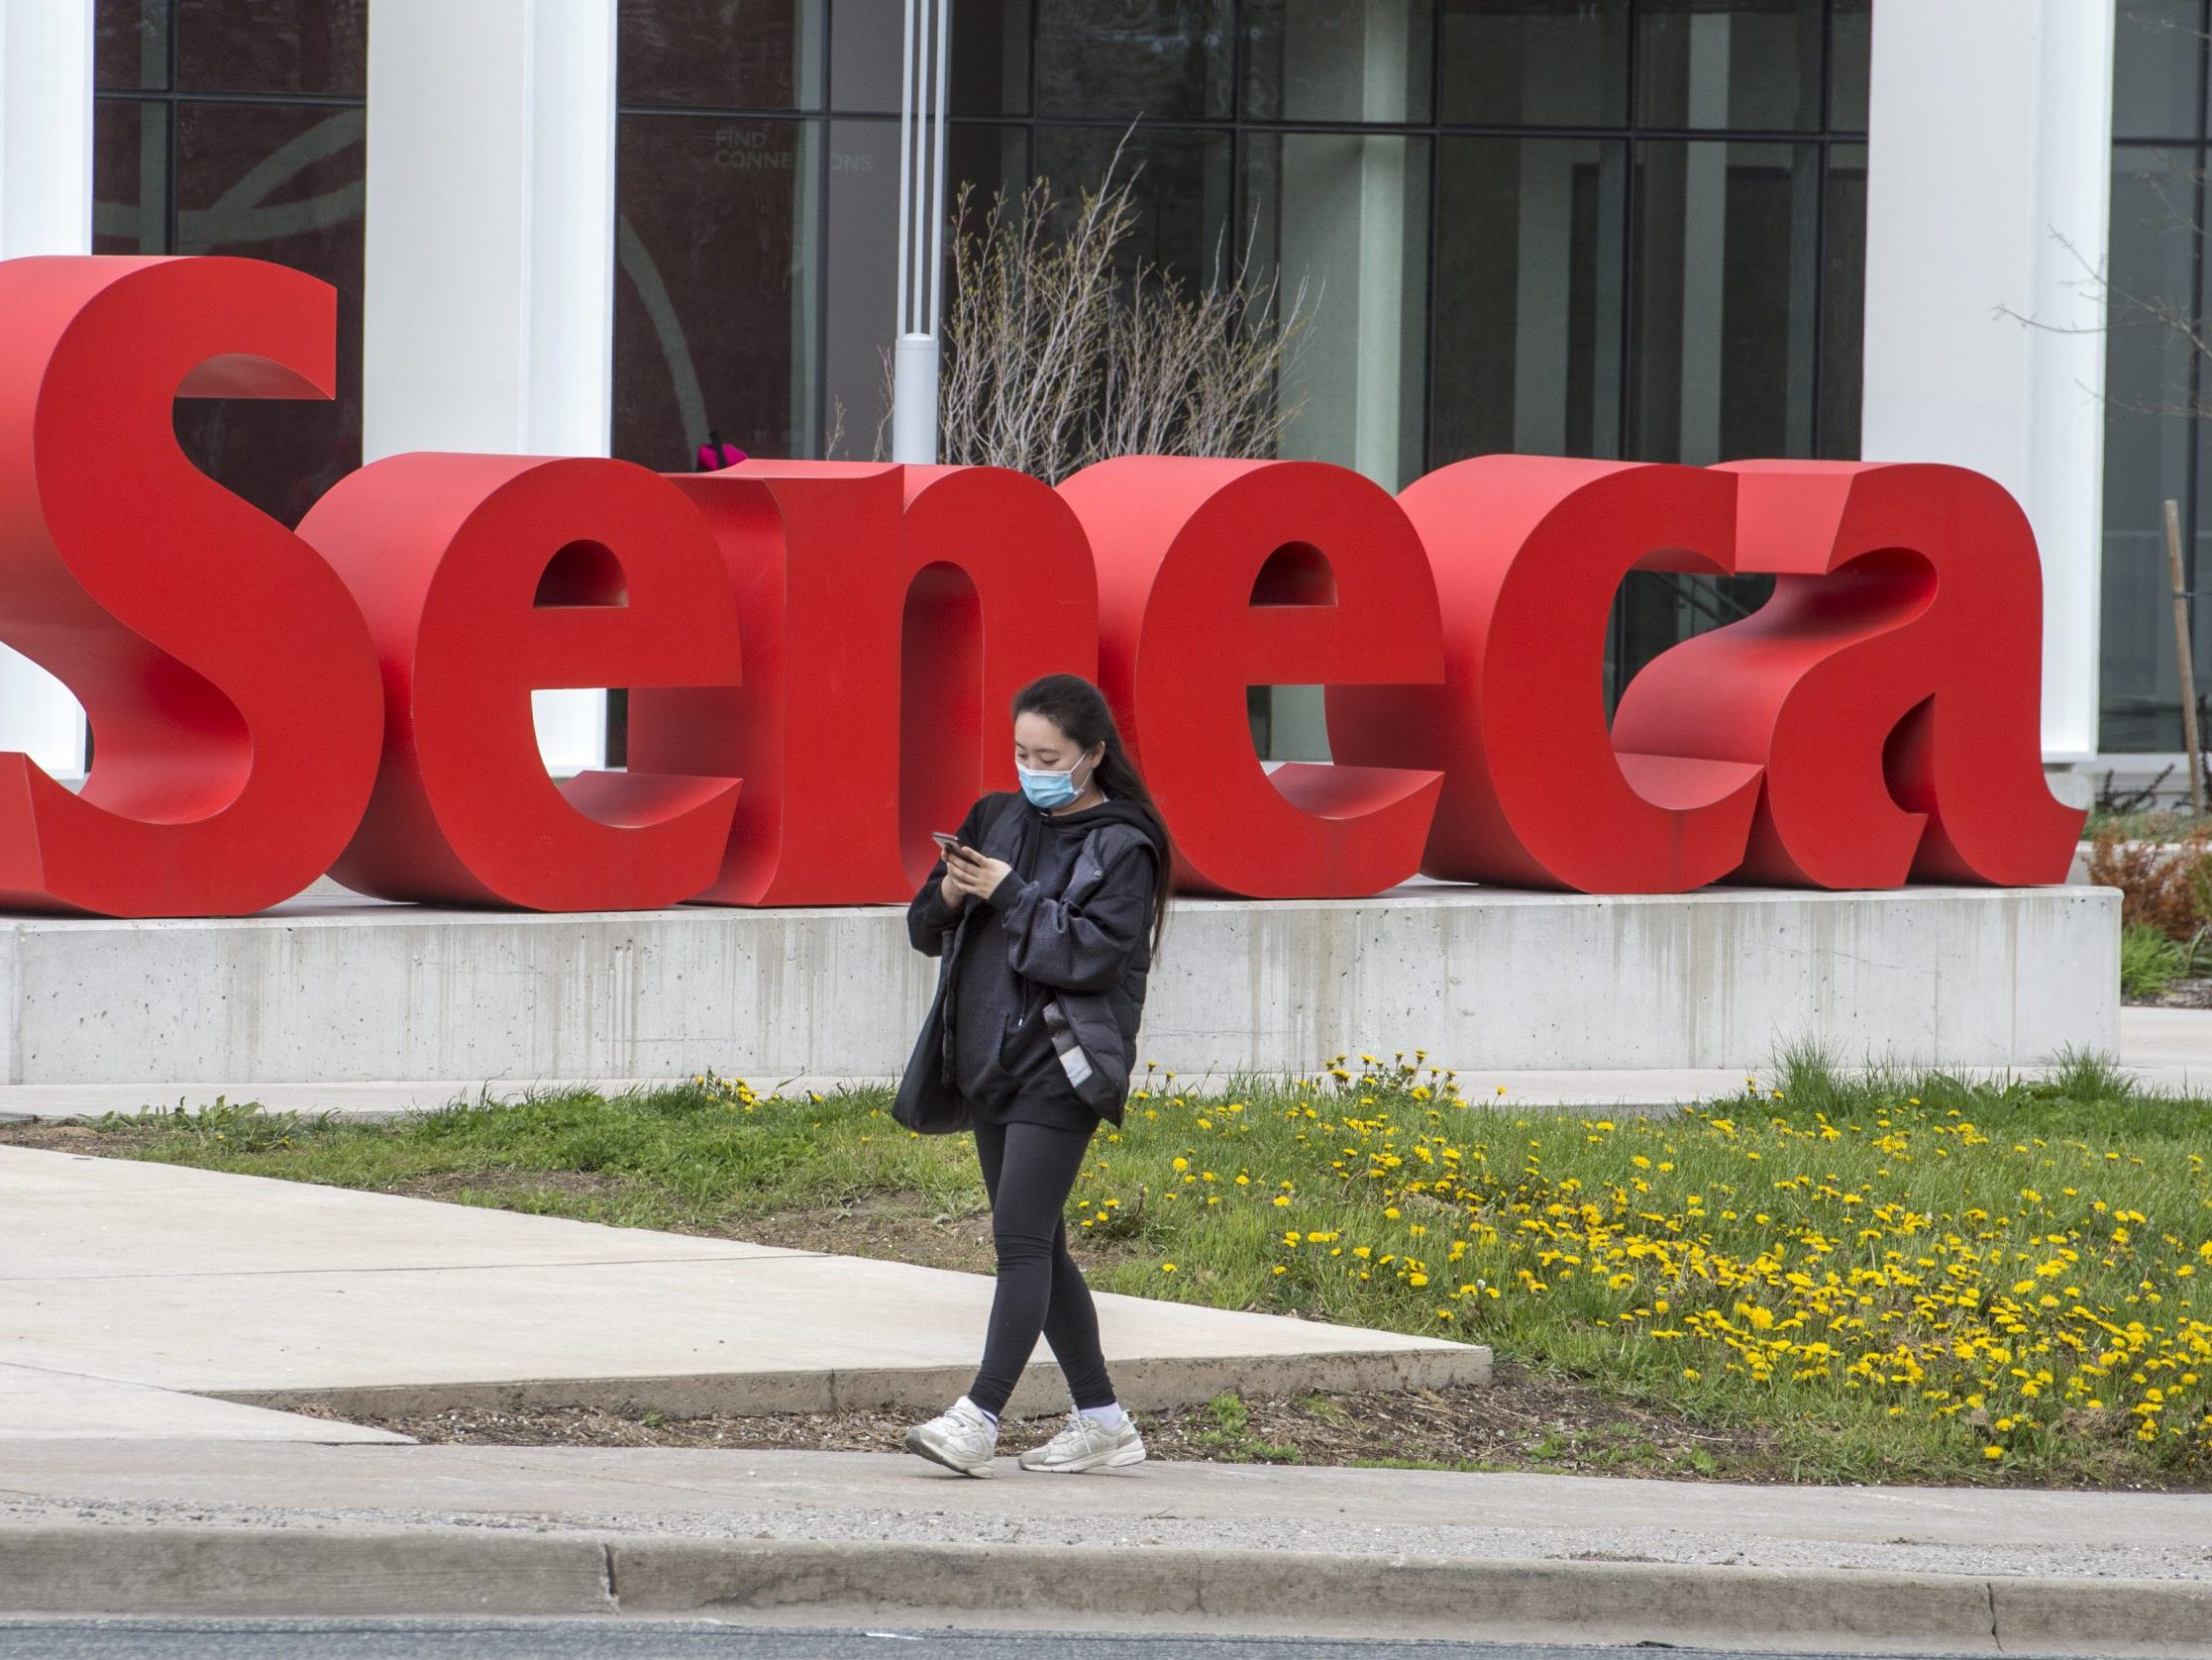 Only those fully inoculated against COVID will be invited back this fall at Seneca College locations that include the Newnham Campus in North York. Ont.